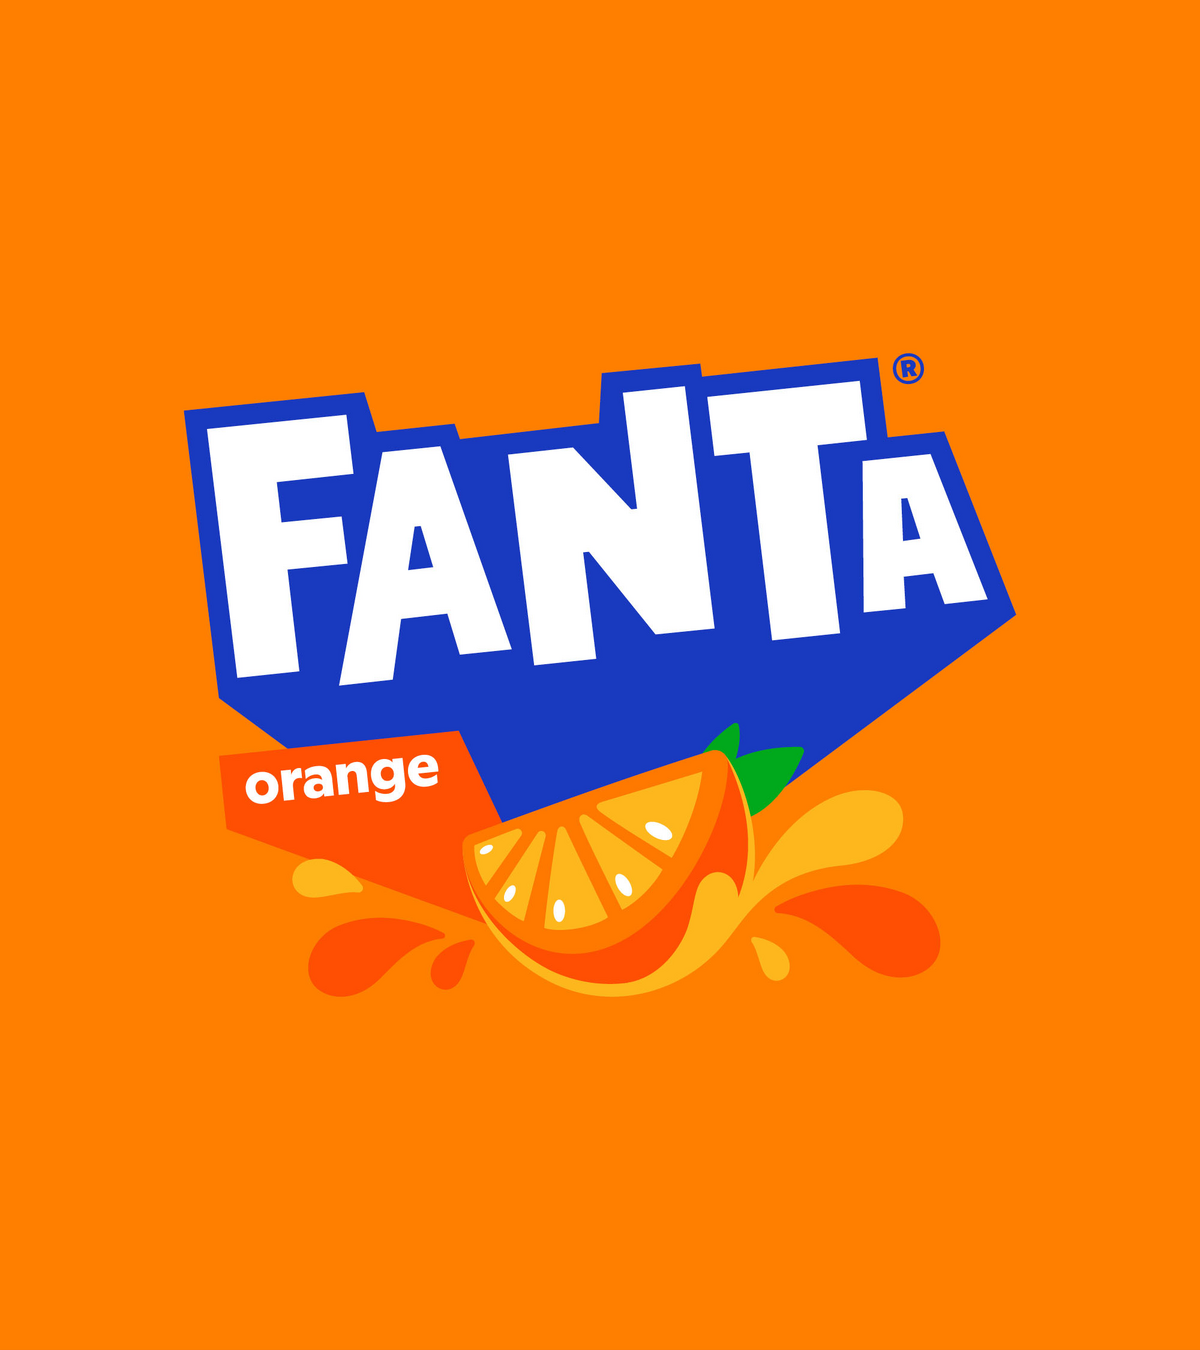 https://static.wikia.nocookie.net/the-soda/images/f/f6/2023_U.S._Fanta_Orange_Logo.png/revision/latest/scale-to-width-down/1200?cb=20230914221106